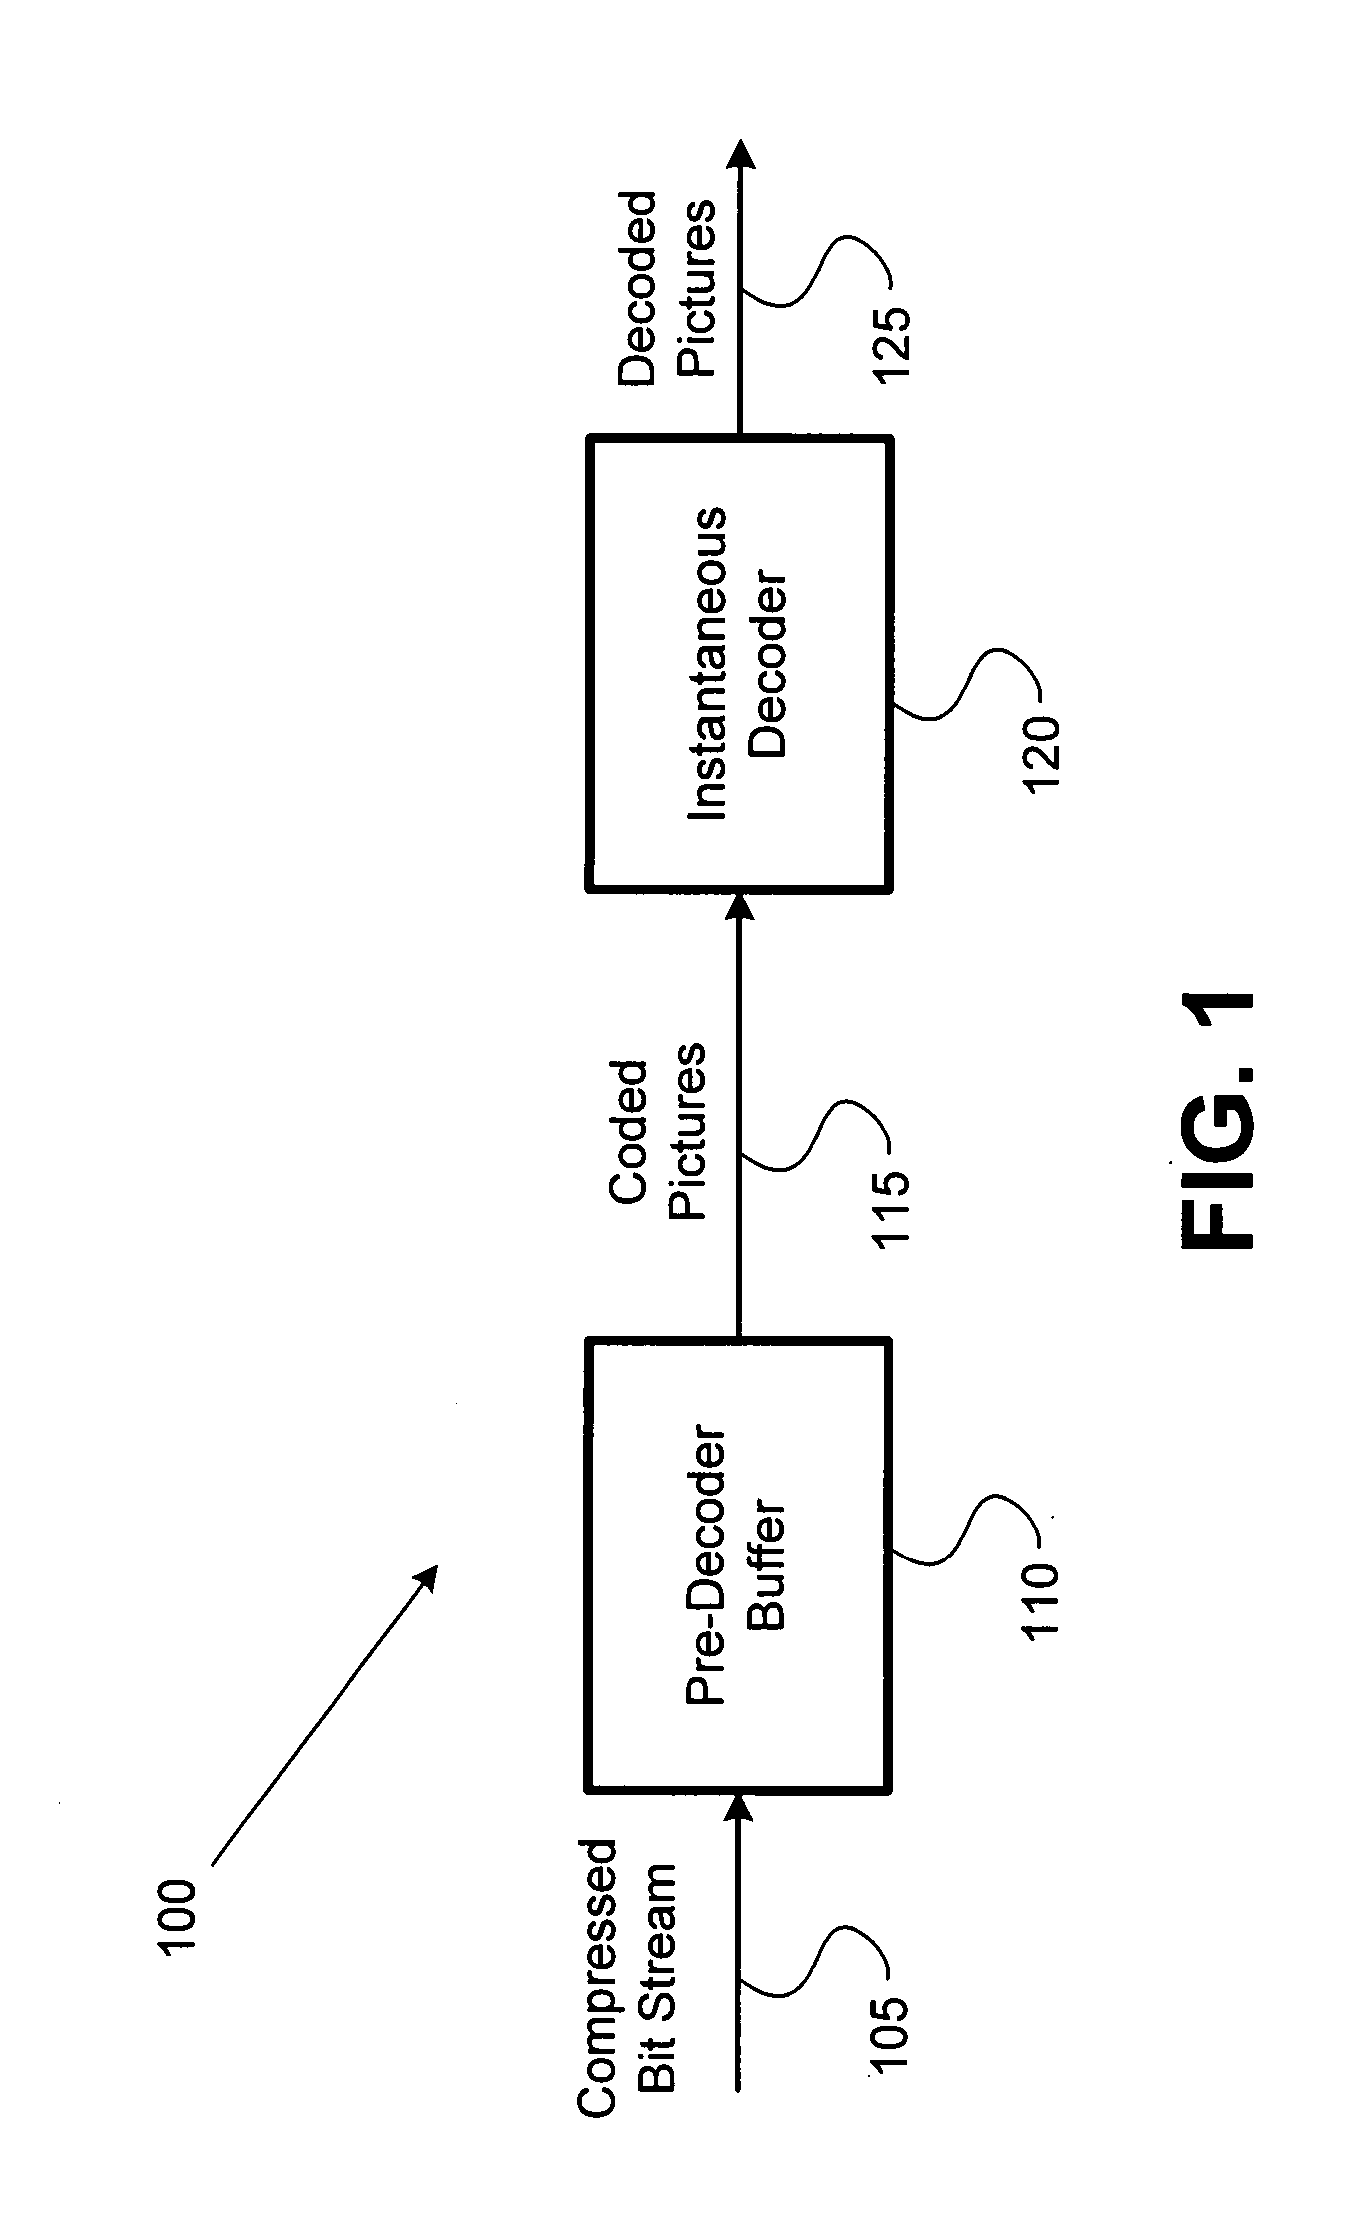 Hypothetical reference decoder for compressed image and video